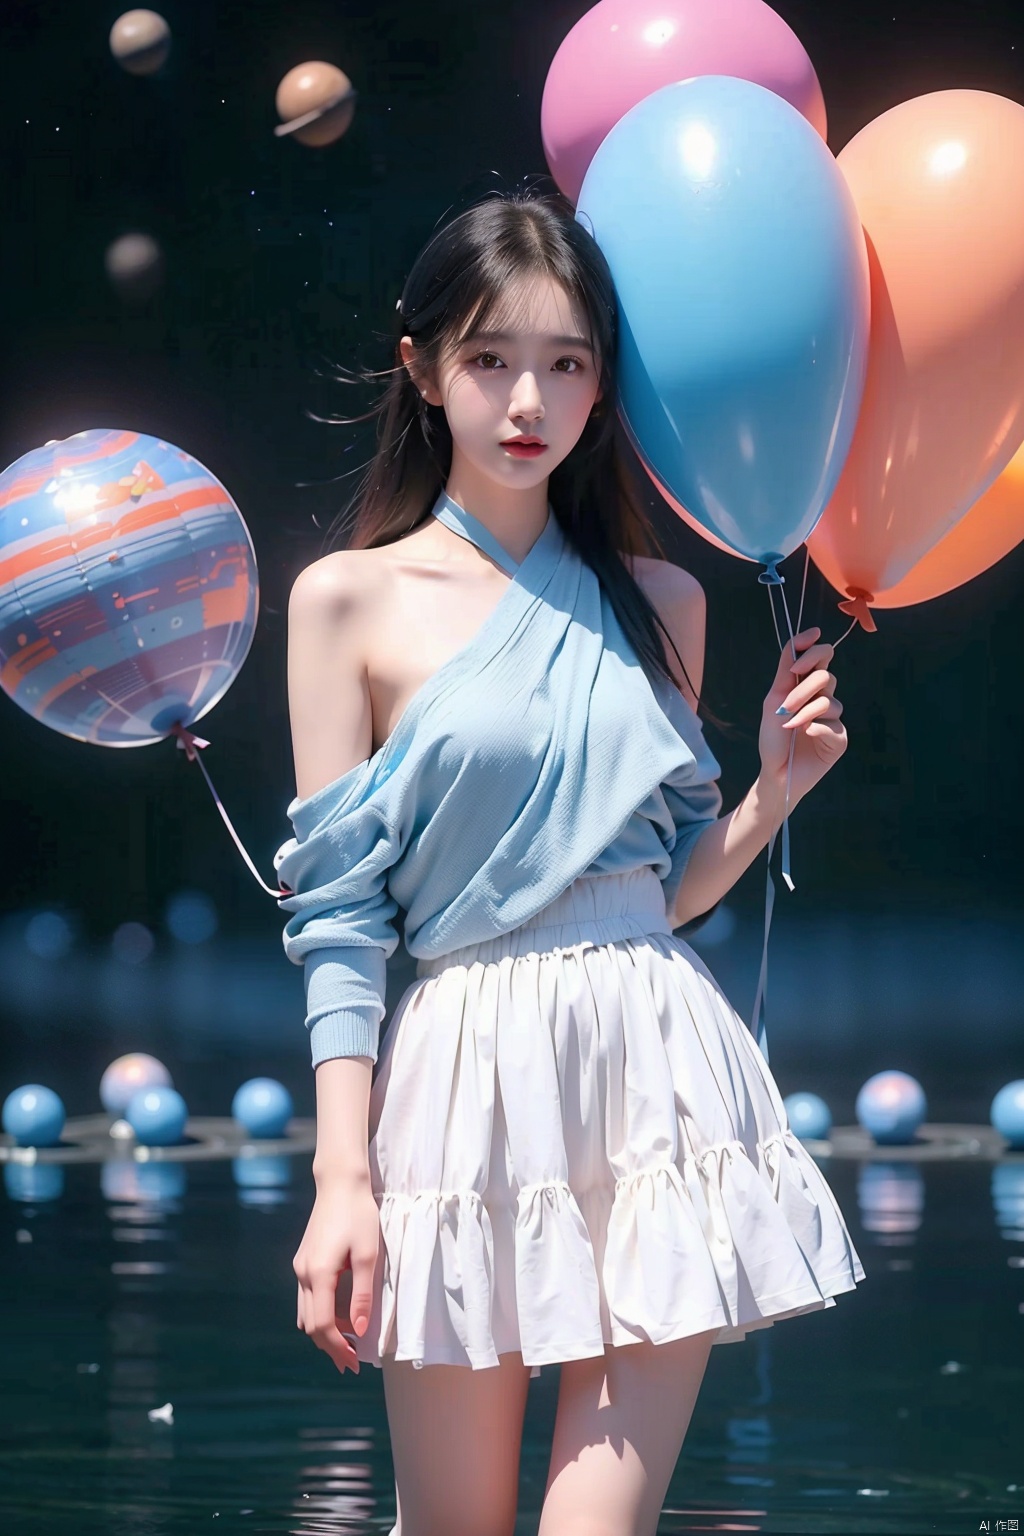  ([balloons:Small planets:0.5]:1.4),(Small_planets inside of balloons:1.4),(lots of colorful Small_planets:1.35),(colorful planets, earth, floating petals, big balloons:1.22),1girl,cute face,standing,detailed beautiful eyes,bare legs,costume combination,perfect body,(white|blue|Gradient hair), ice_planet,(lots of [floting blue Butterflies:floting ice:0.4]:1.22),(detailed light),(an extremely delicate and beautiful),volume light,best shadow,cinematic lighting,Depth of field,Oily skin